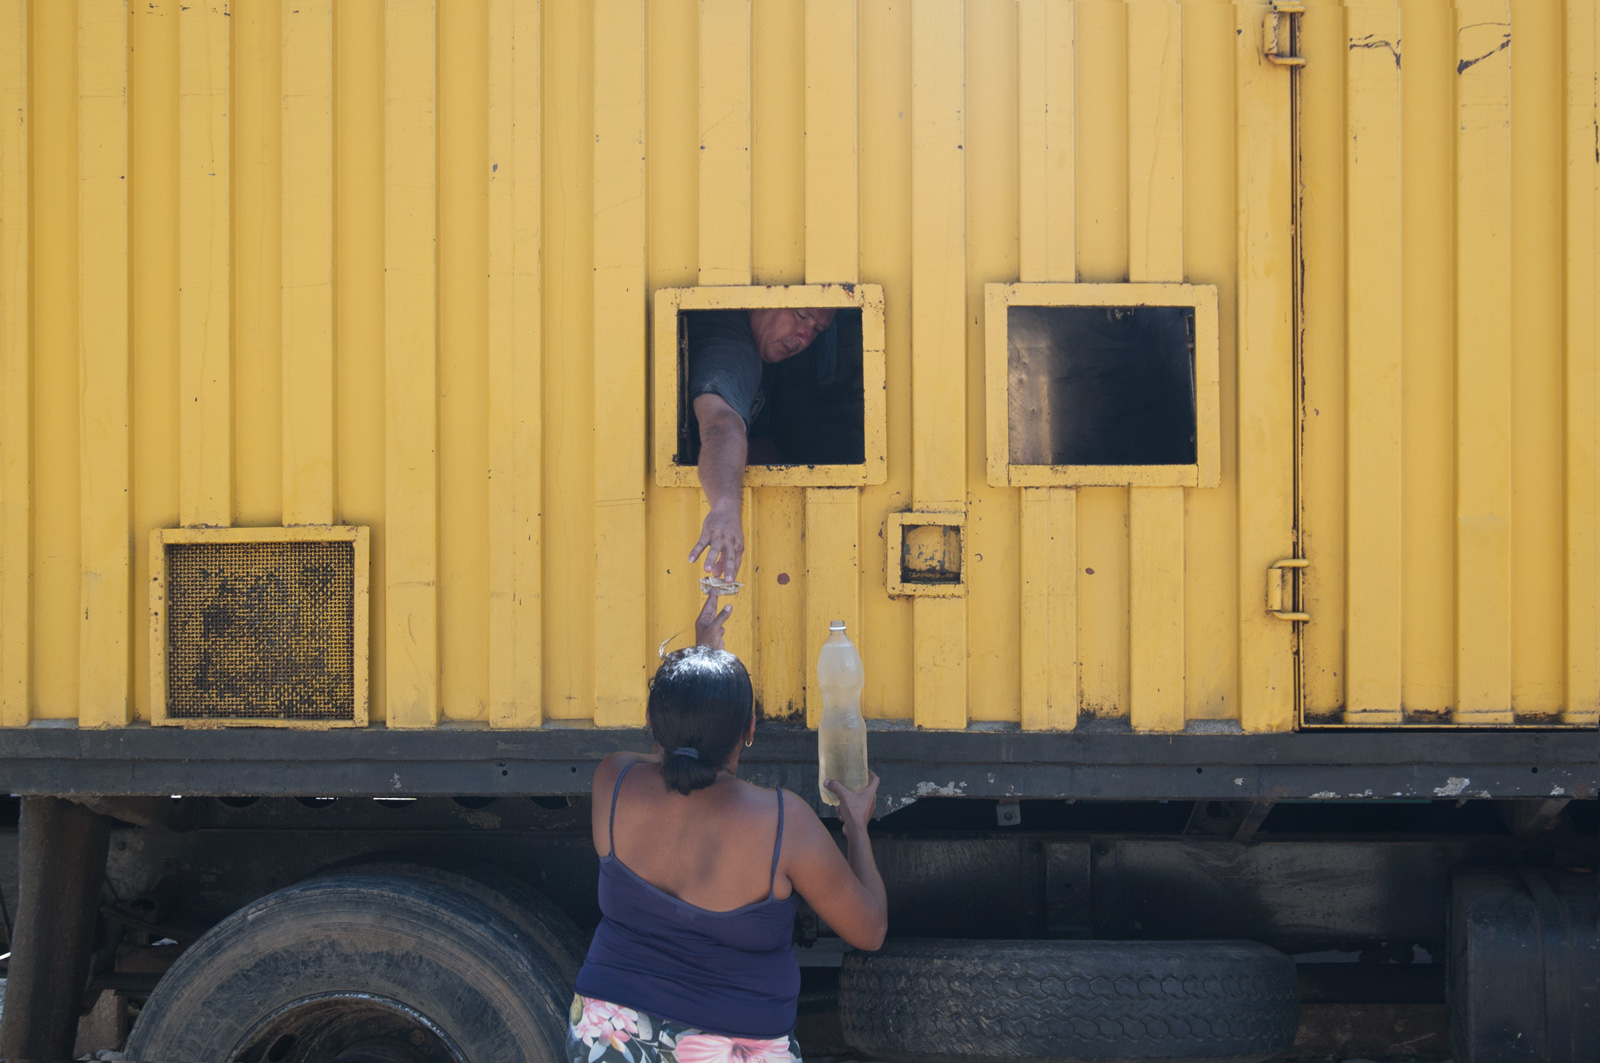 Woman buying from a man inside a truck